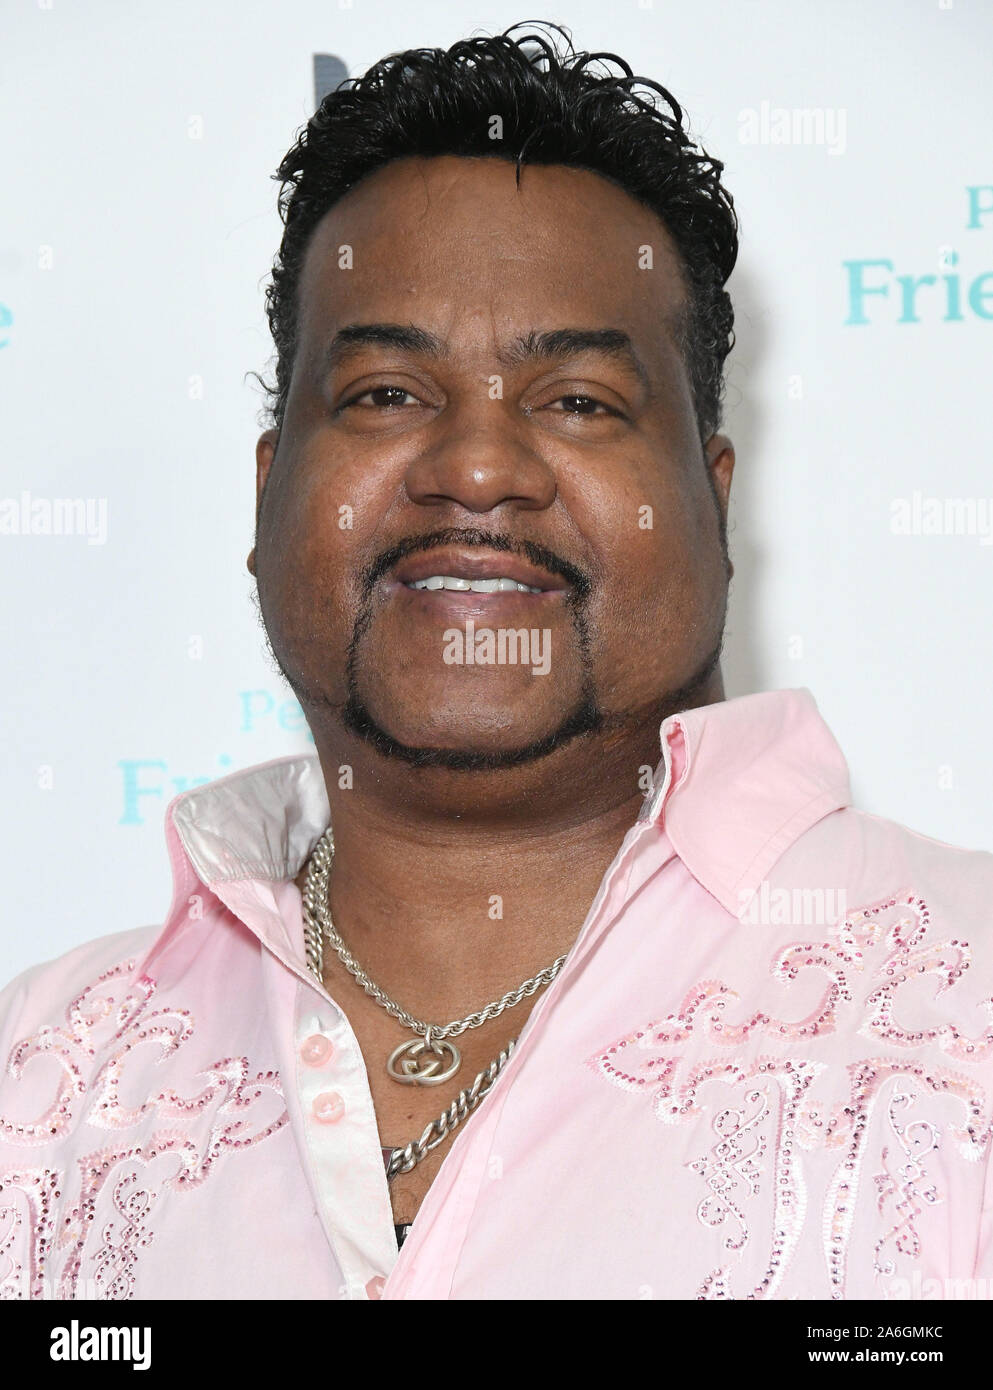 October 25, 2019, Beverly Hills, California, USA: 26 October 2019 -Beverly Hills, California - Marvin Gaye III. Friendly House 30th Annual Awards Luncheon held at the Beverly Hilton Hotel. Photo Credit: Birdie Thompson/AdMedia (Credit Image: © Birdie Thompson/AdMedia via ZUMA Wire) Stock Photo